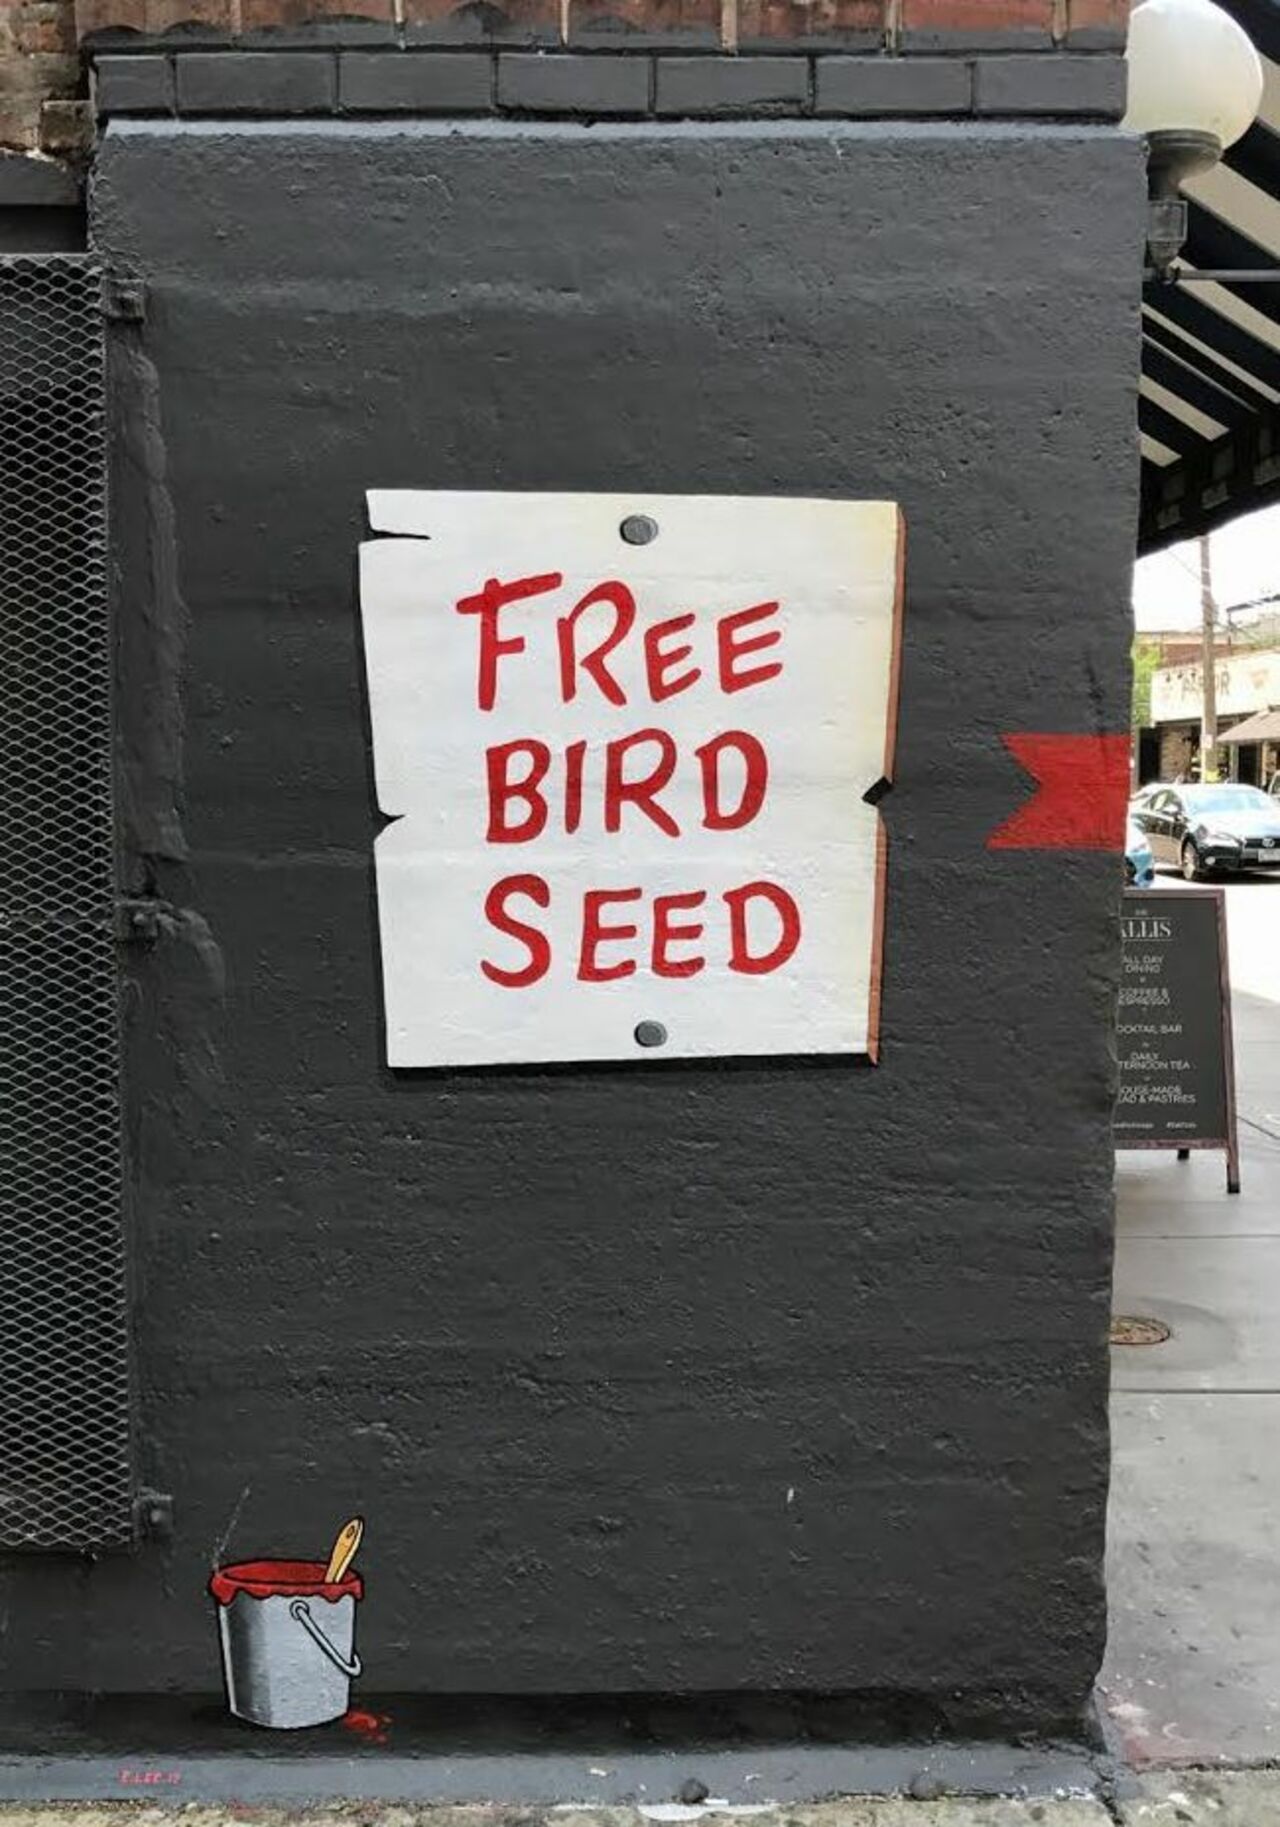 E. LEE Entices Us With “Free Bird Seed” In Chicago #streetart #mural #graffiti #art https://t.co/IekMnDuL2c